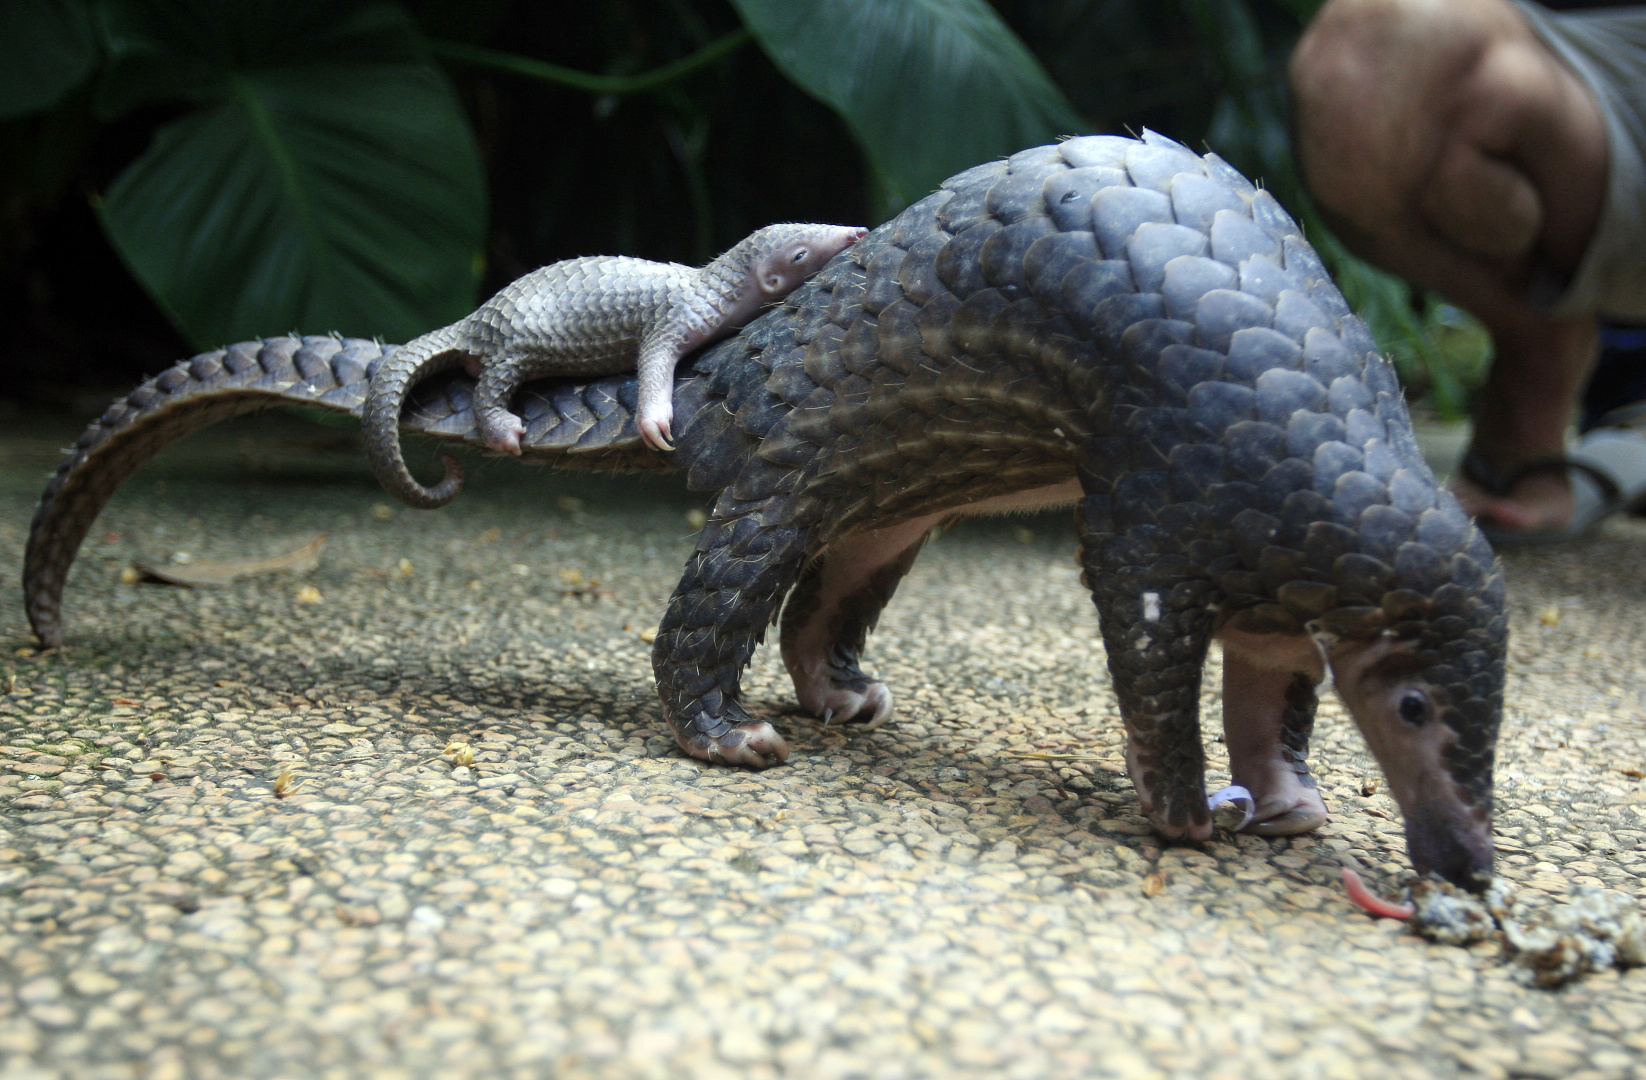 Pangolin numbers have plunged in recent years in part because of Chinese demand. Photo: AP